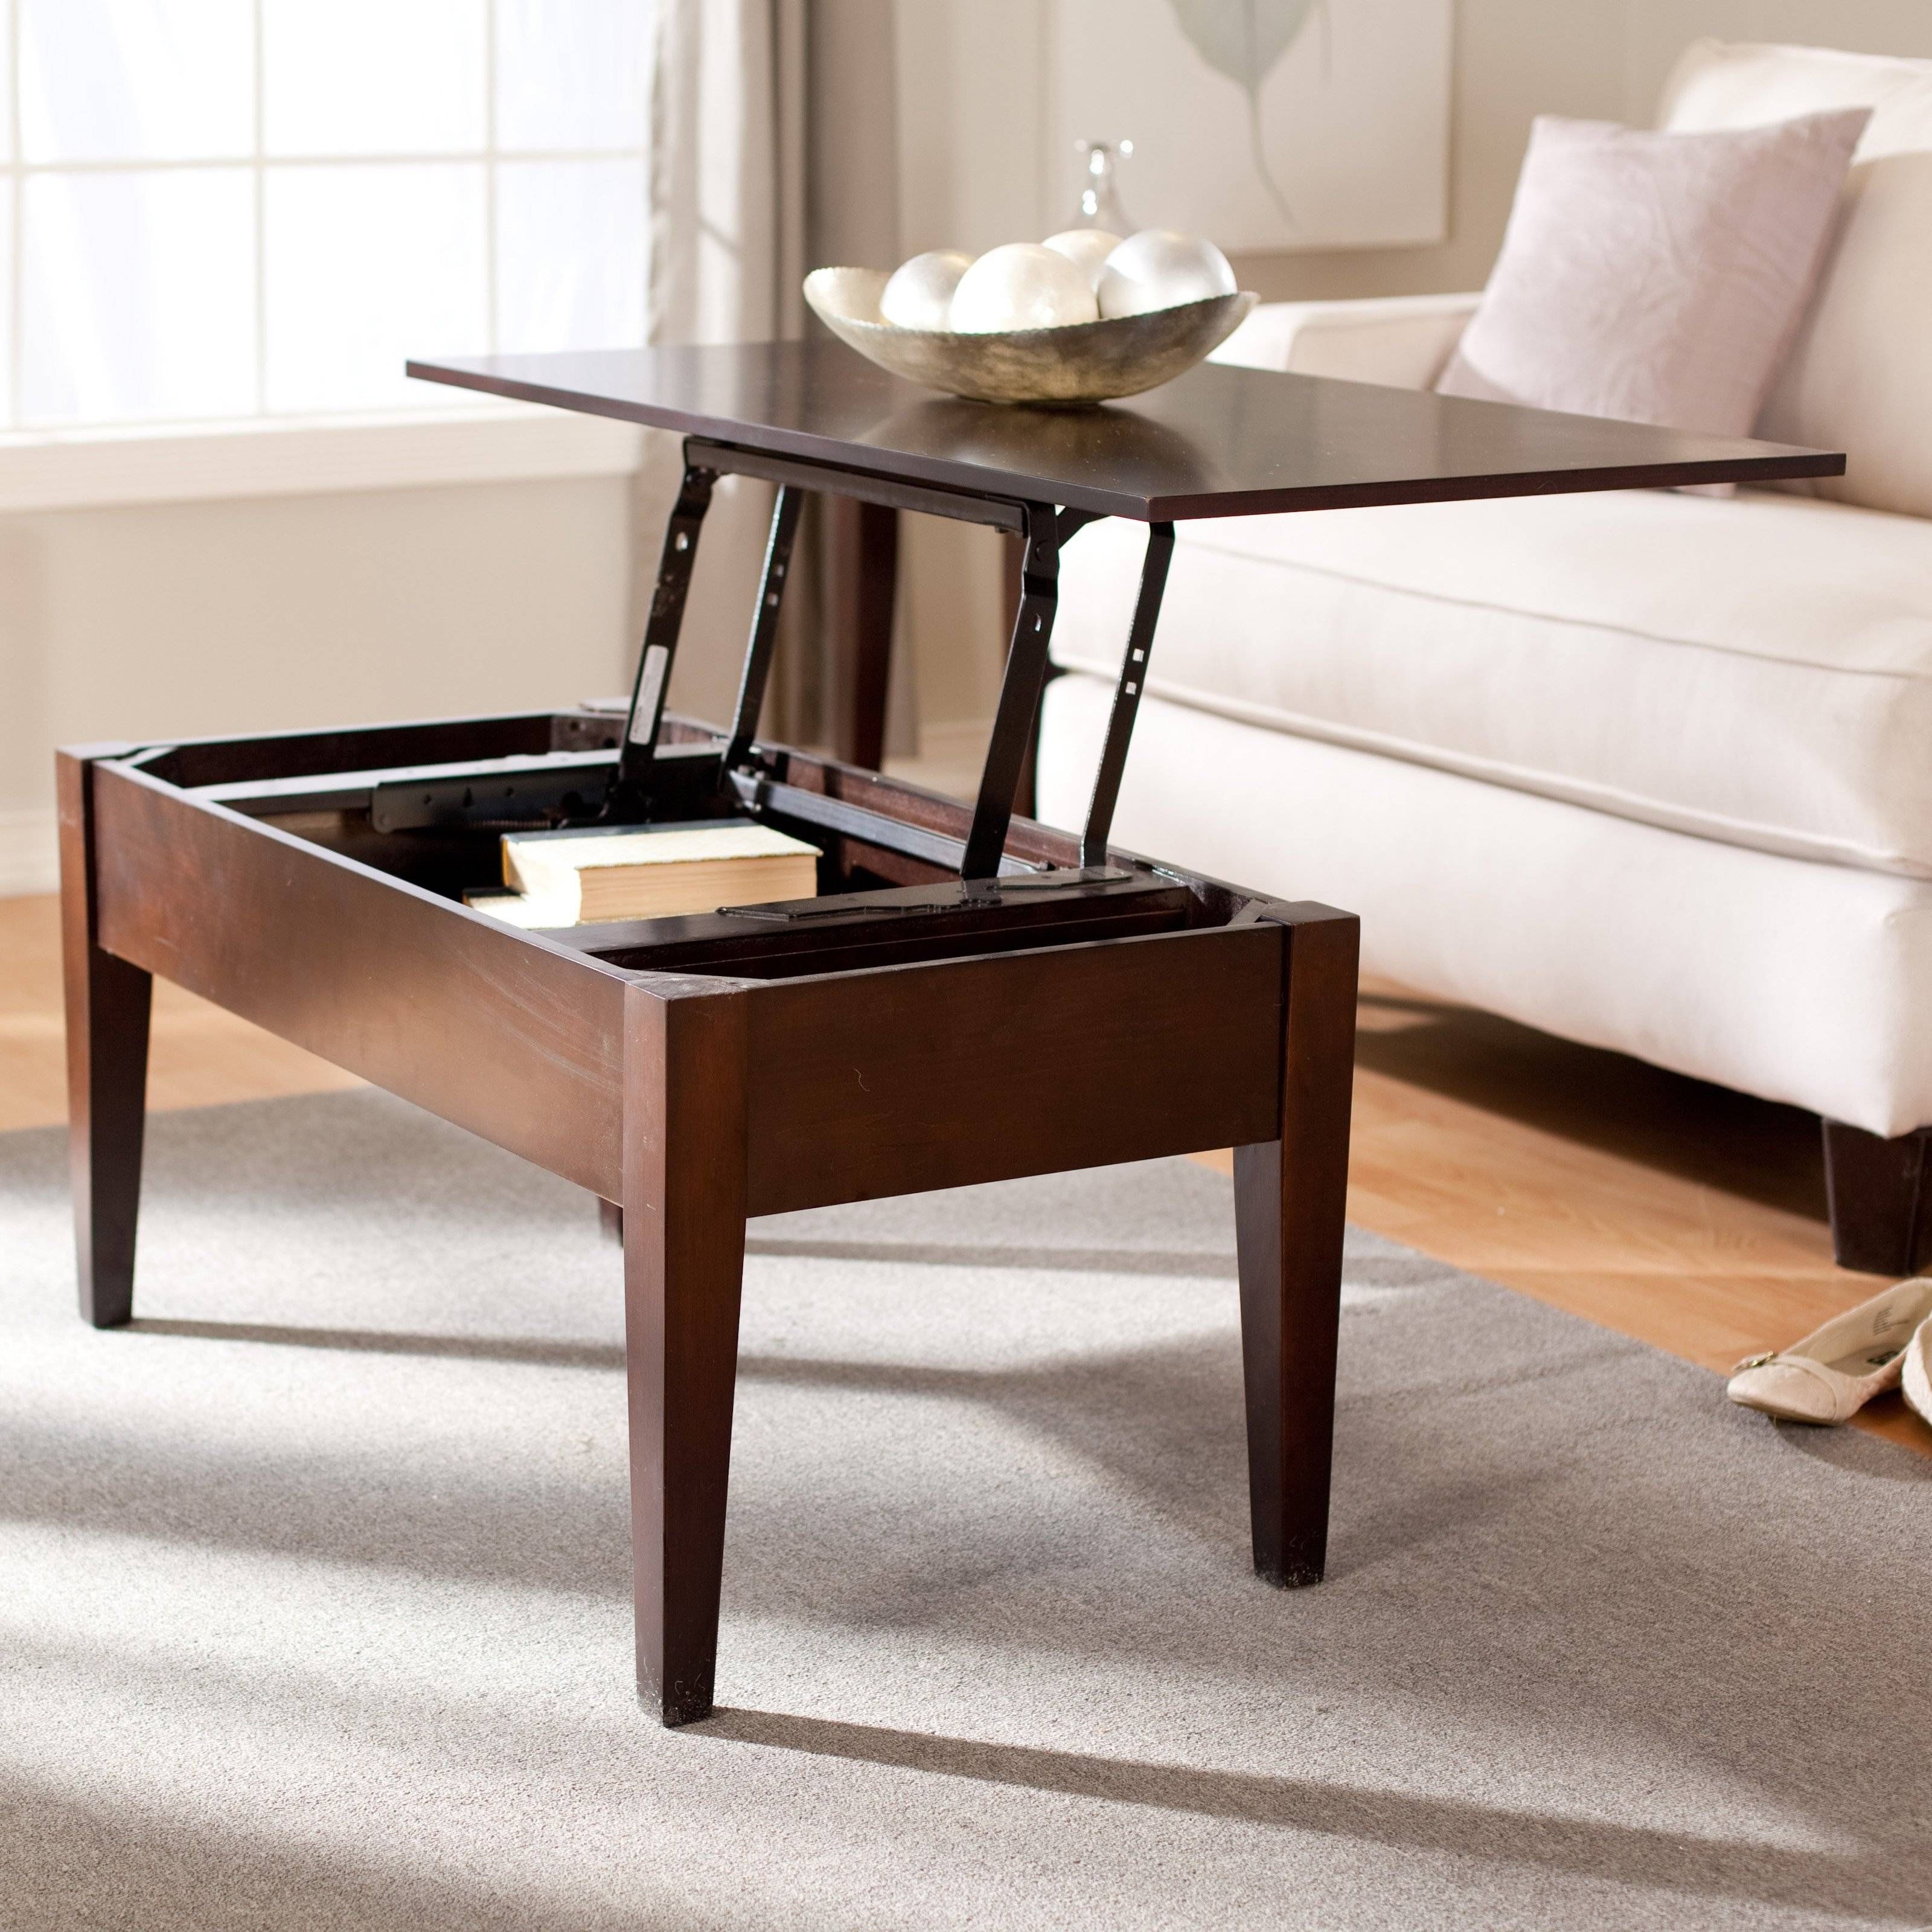 Turner Lift Top Coffee Table – Gray | Hayneedle Intended For Coffee Tables With Lift Top Storage (View 6 of 30)